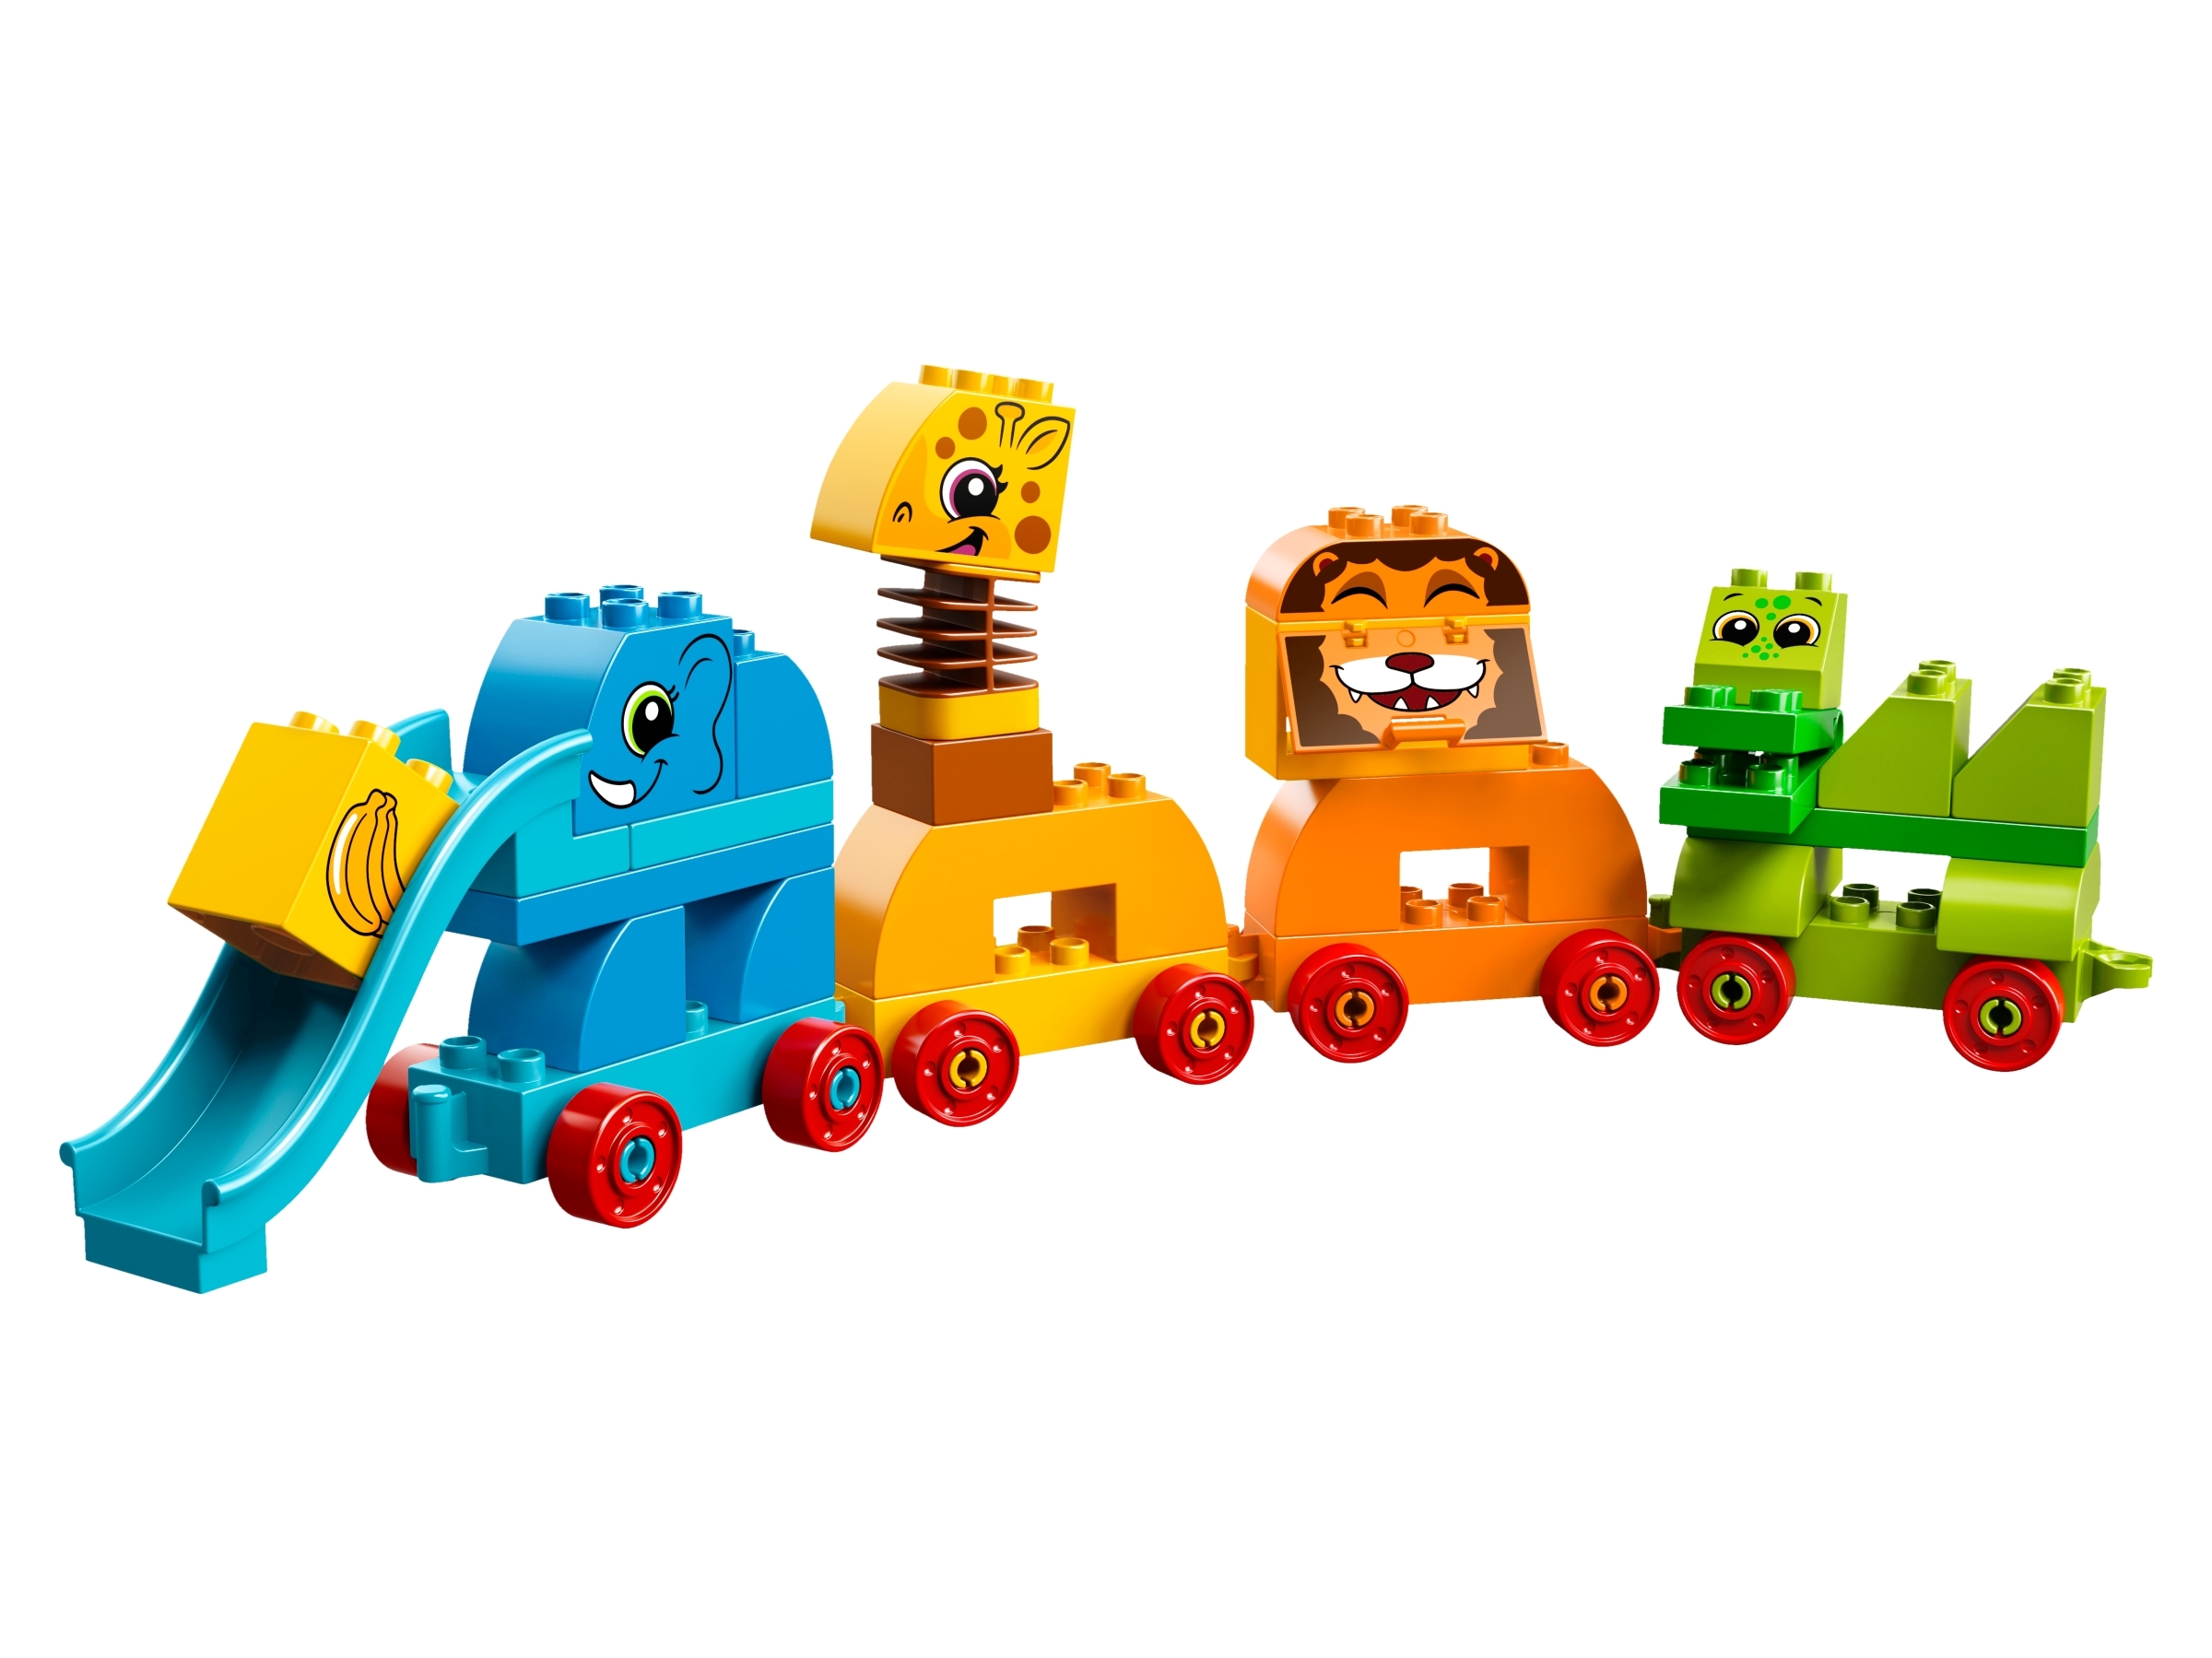 My First Animal Brick Box 10863 | DUPLO® | Buy online at the ...